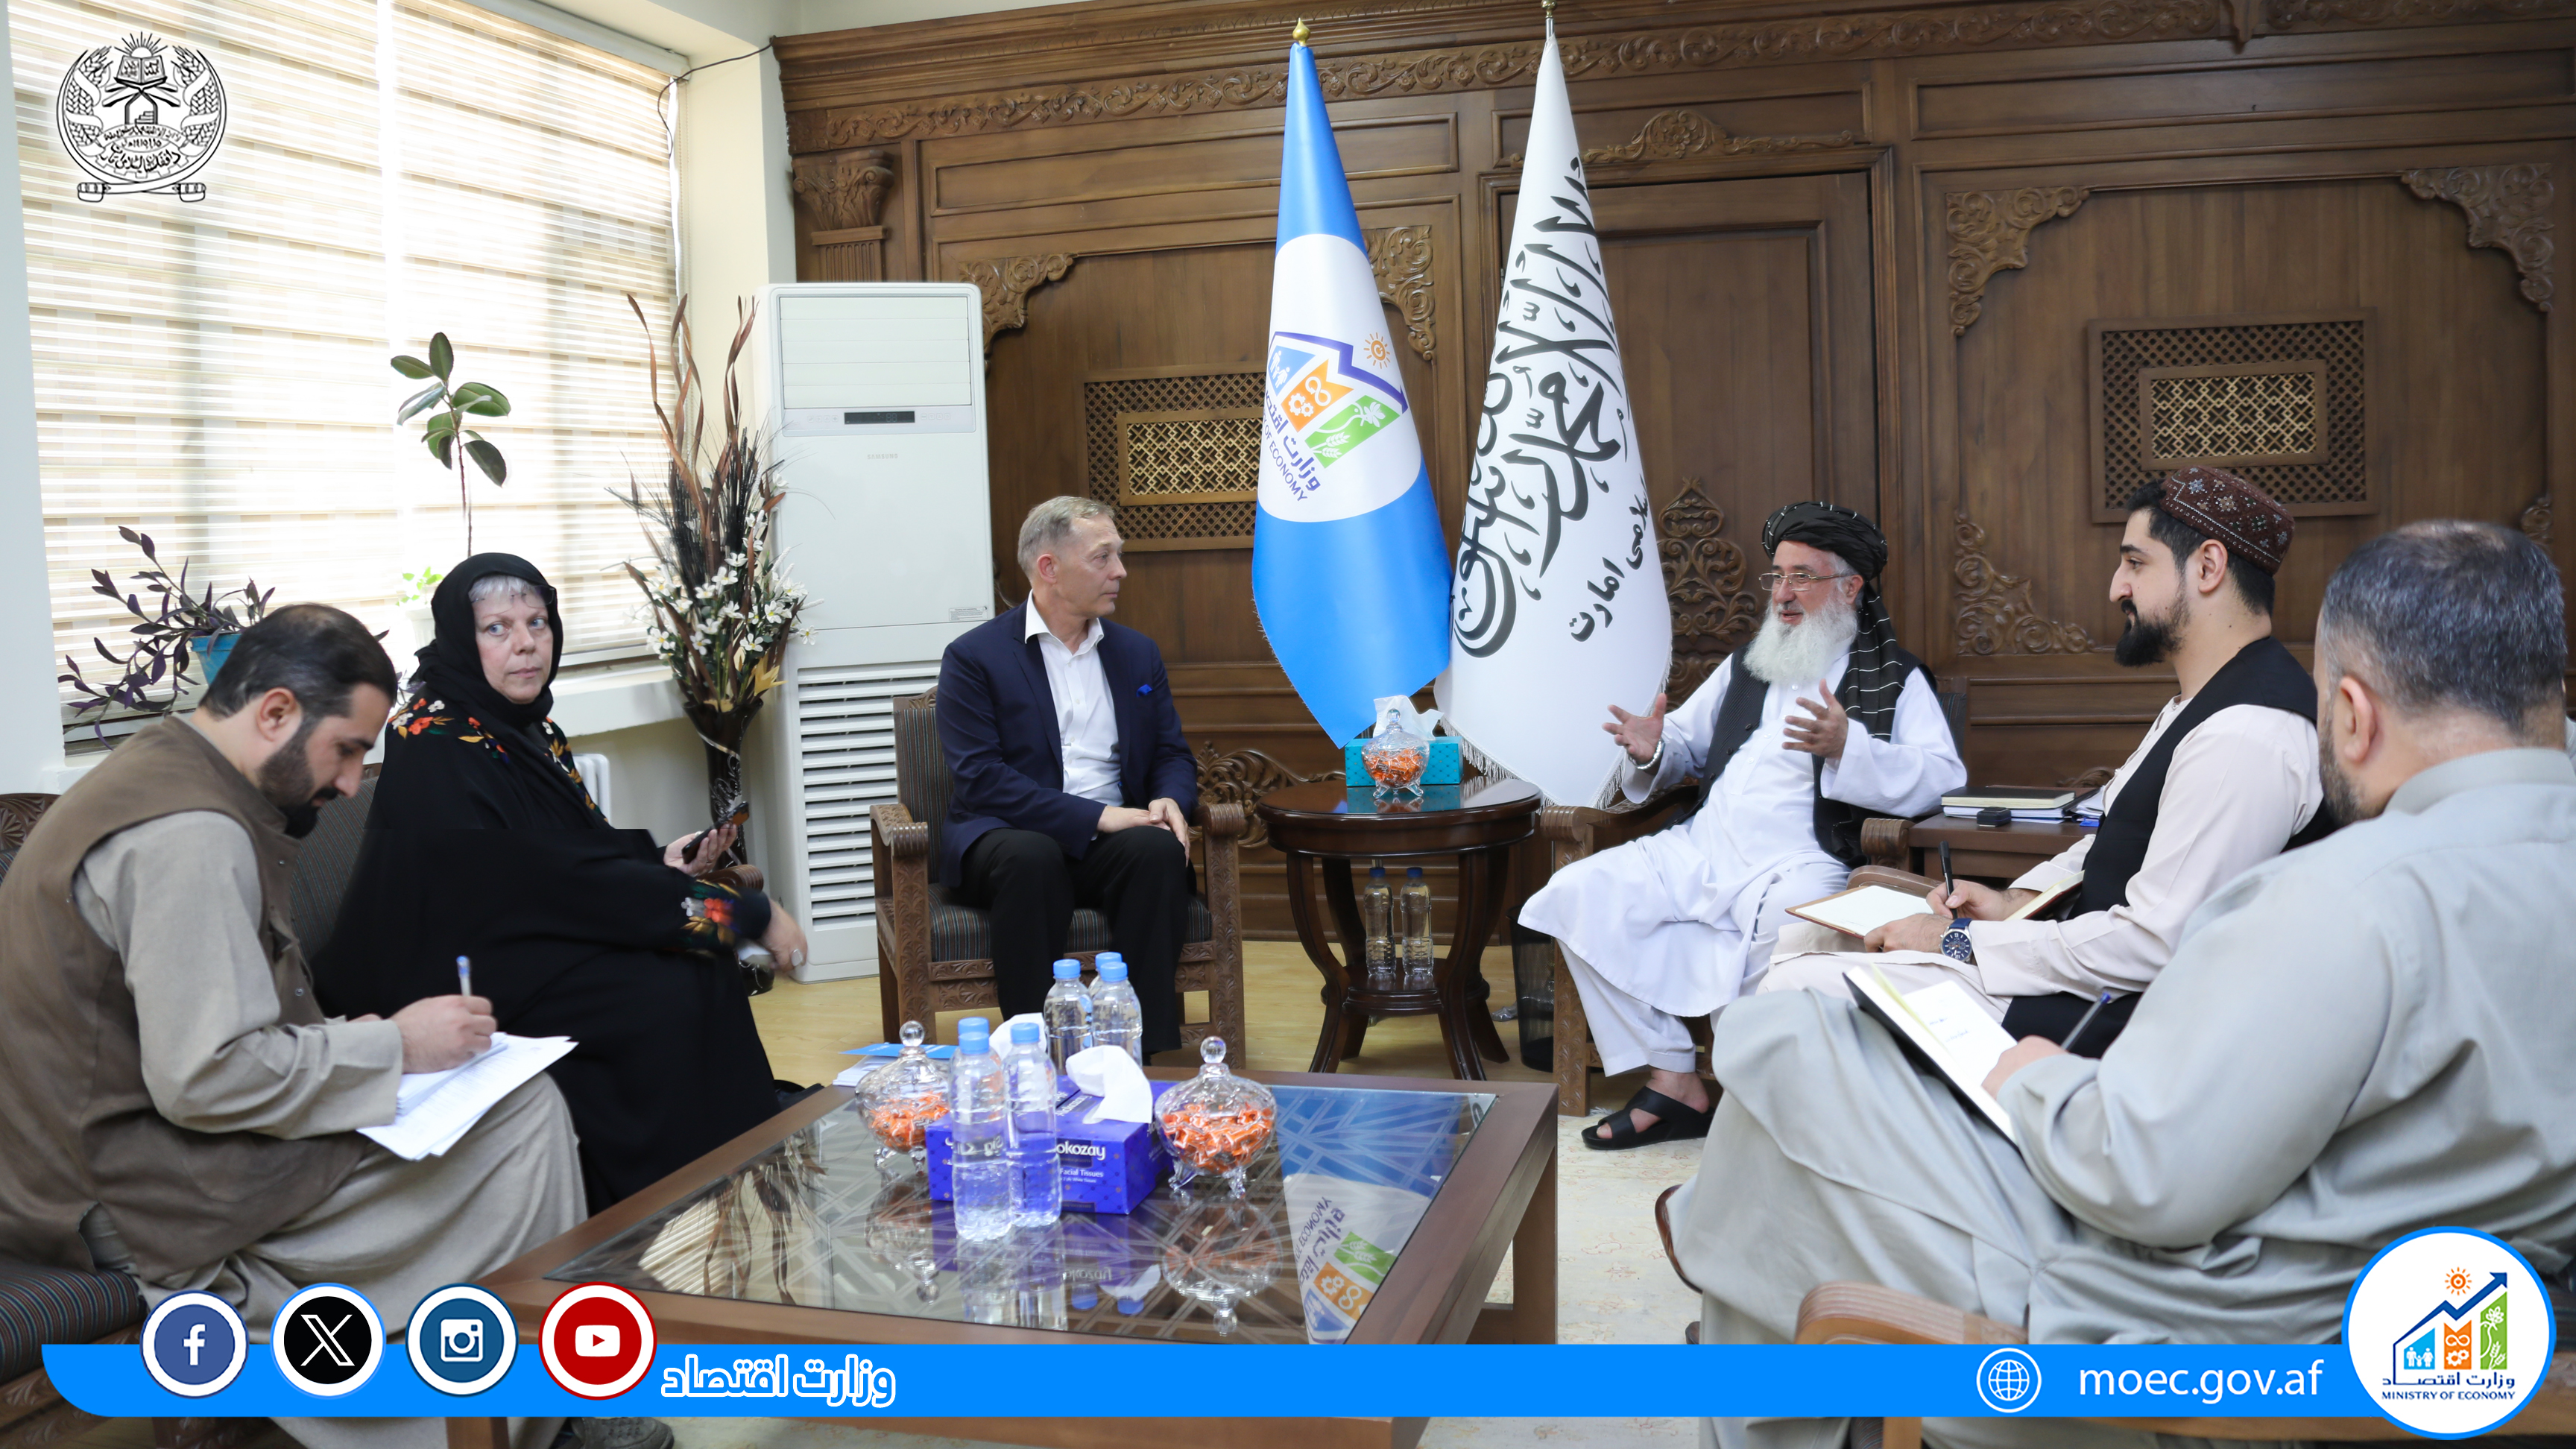 The meeting of Acting Minister of Economy, Alhaj Qari Din Muhammad Hanif, with Daniel Andris, the head of the United Nations Office for the Coordination of Humanitarian Aid in Afghanistan, and Mrs. Isabelle Mussard, the head of OCHA.